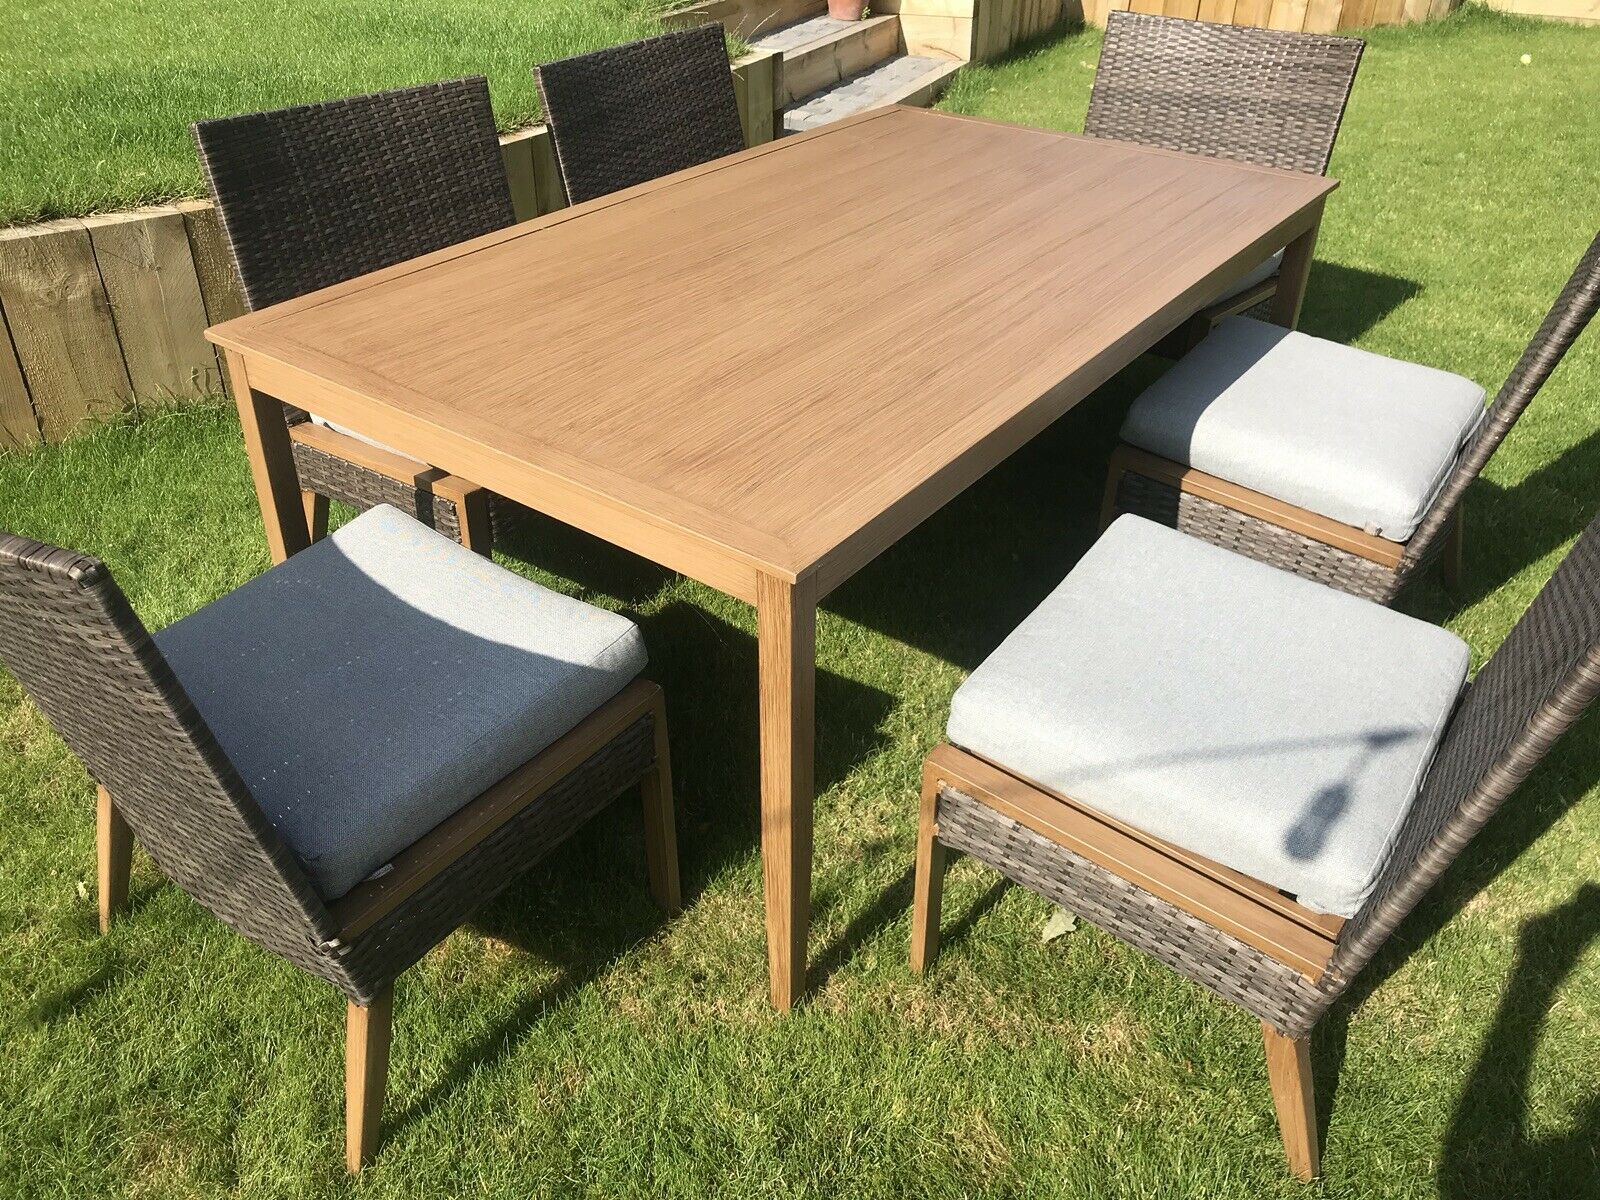 6 Seater Patio Dining Set Outdoor Garden Furniture Table And Chairs With Cushion pertaining to measurements 1600 X 1200